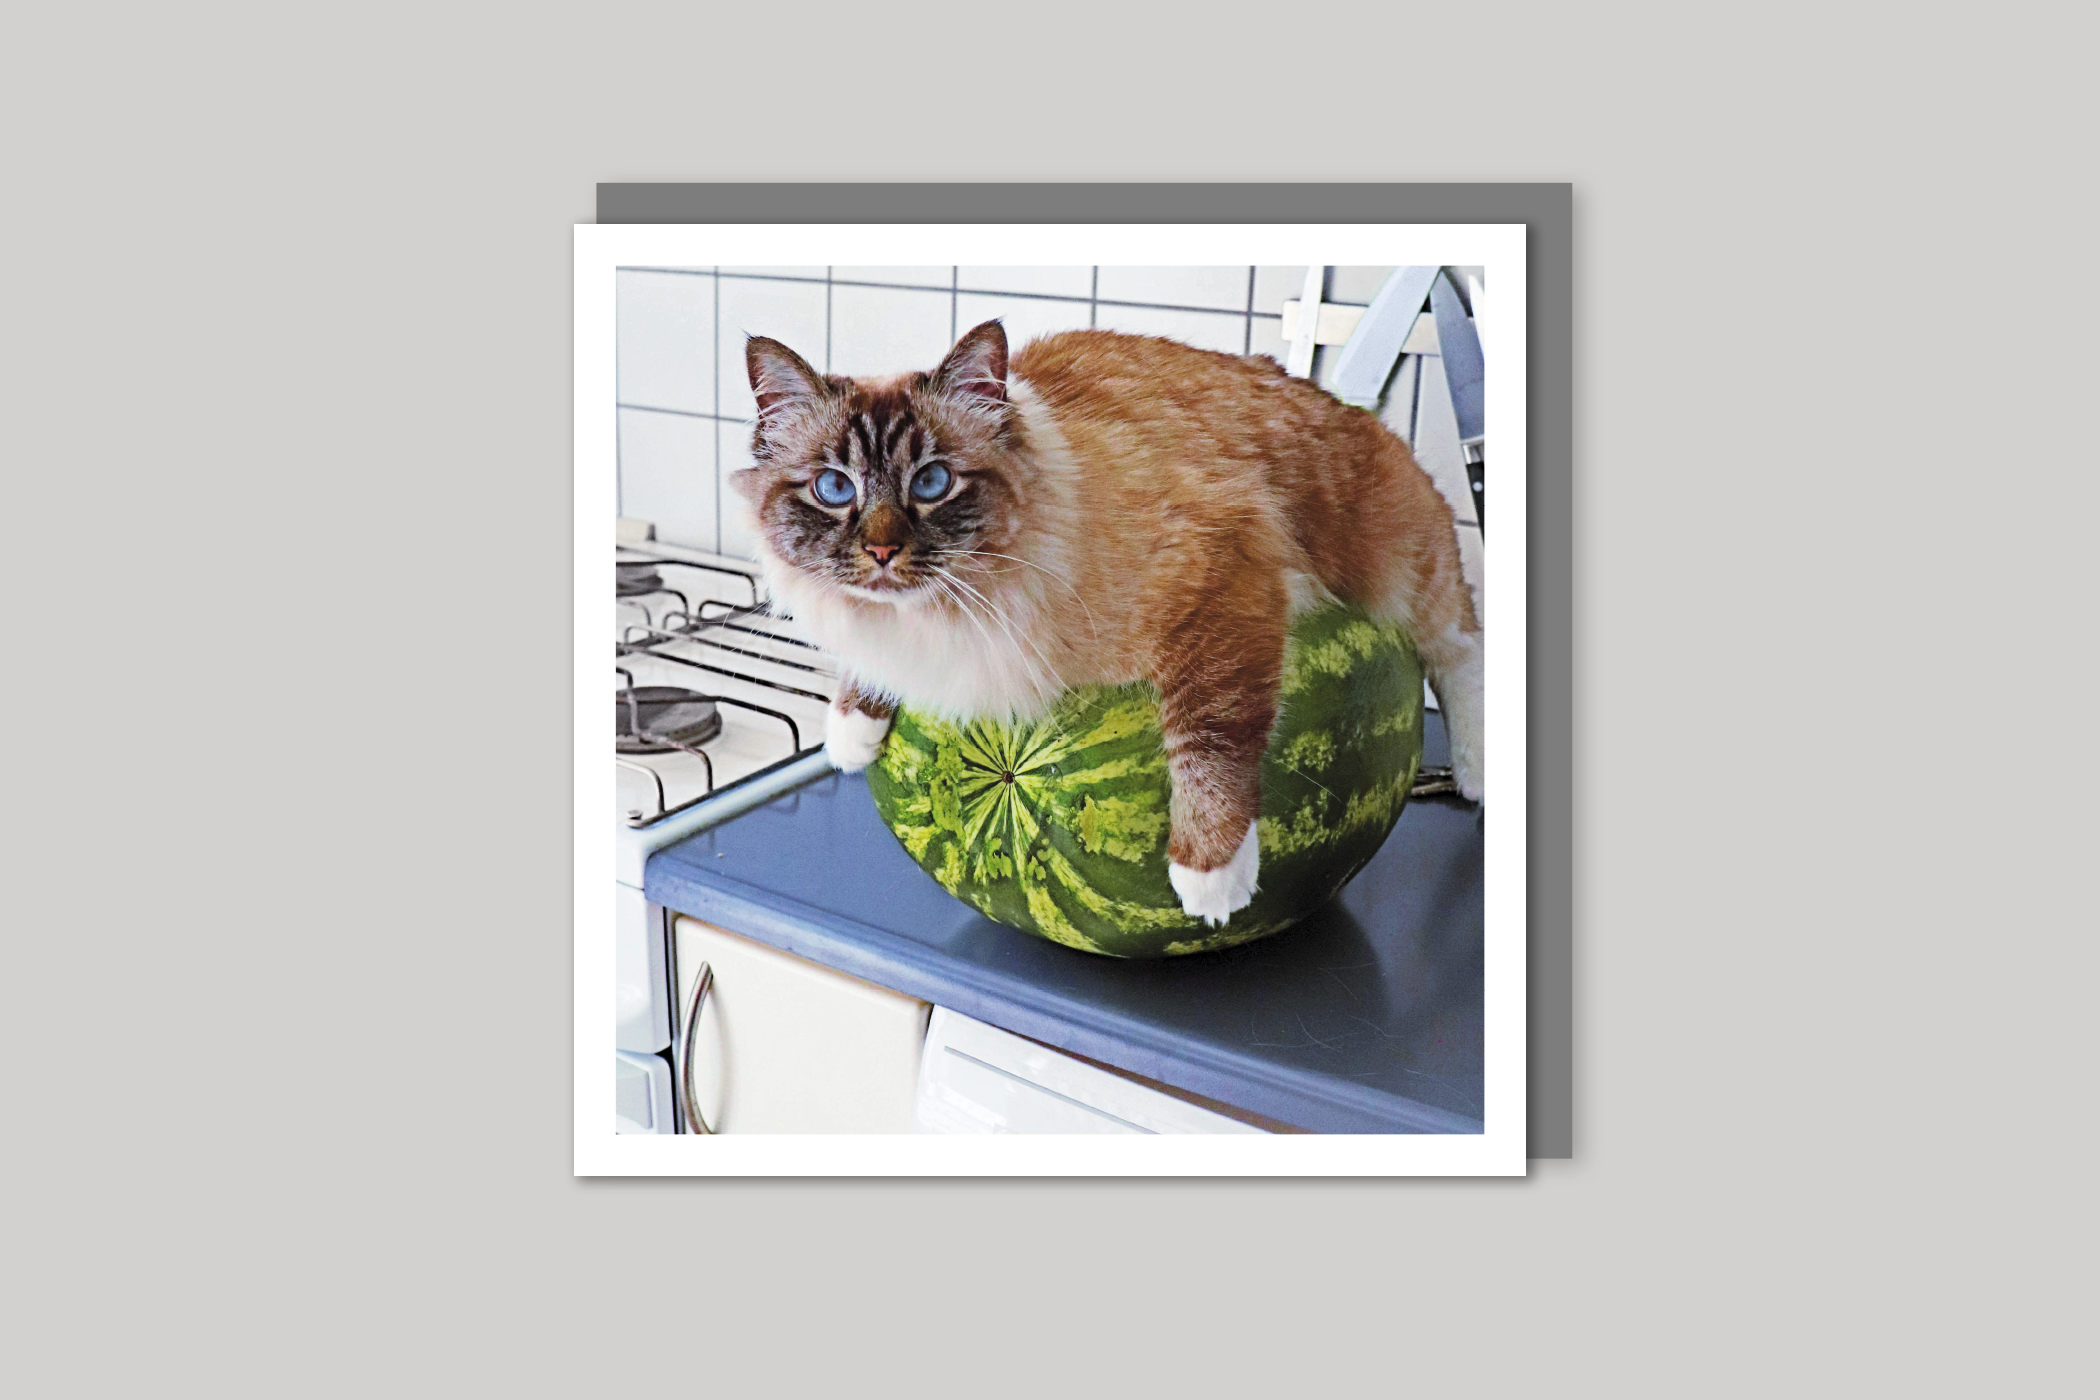 Melon Cat cool photography from Wavelength range of photographic cards by Icon, back page.